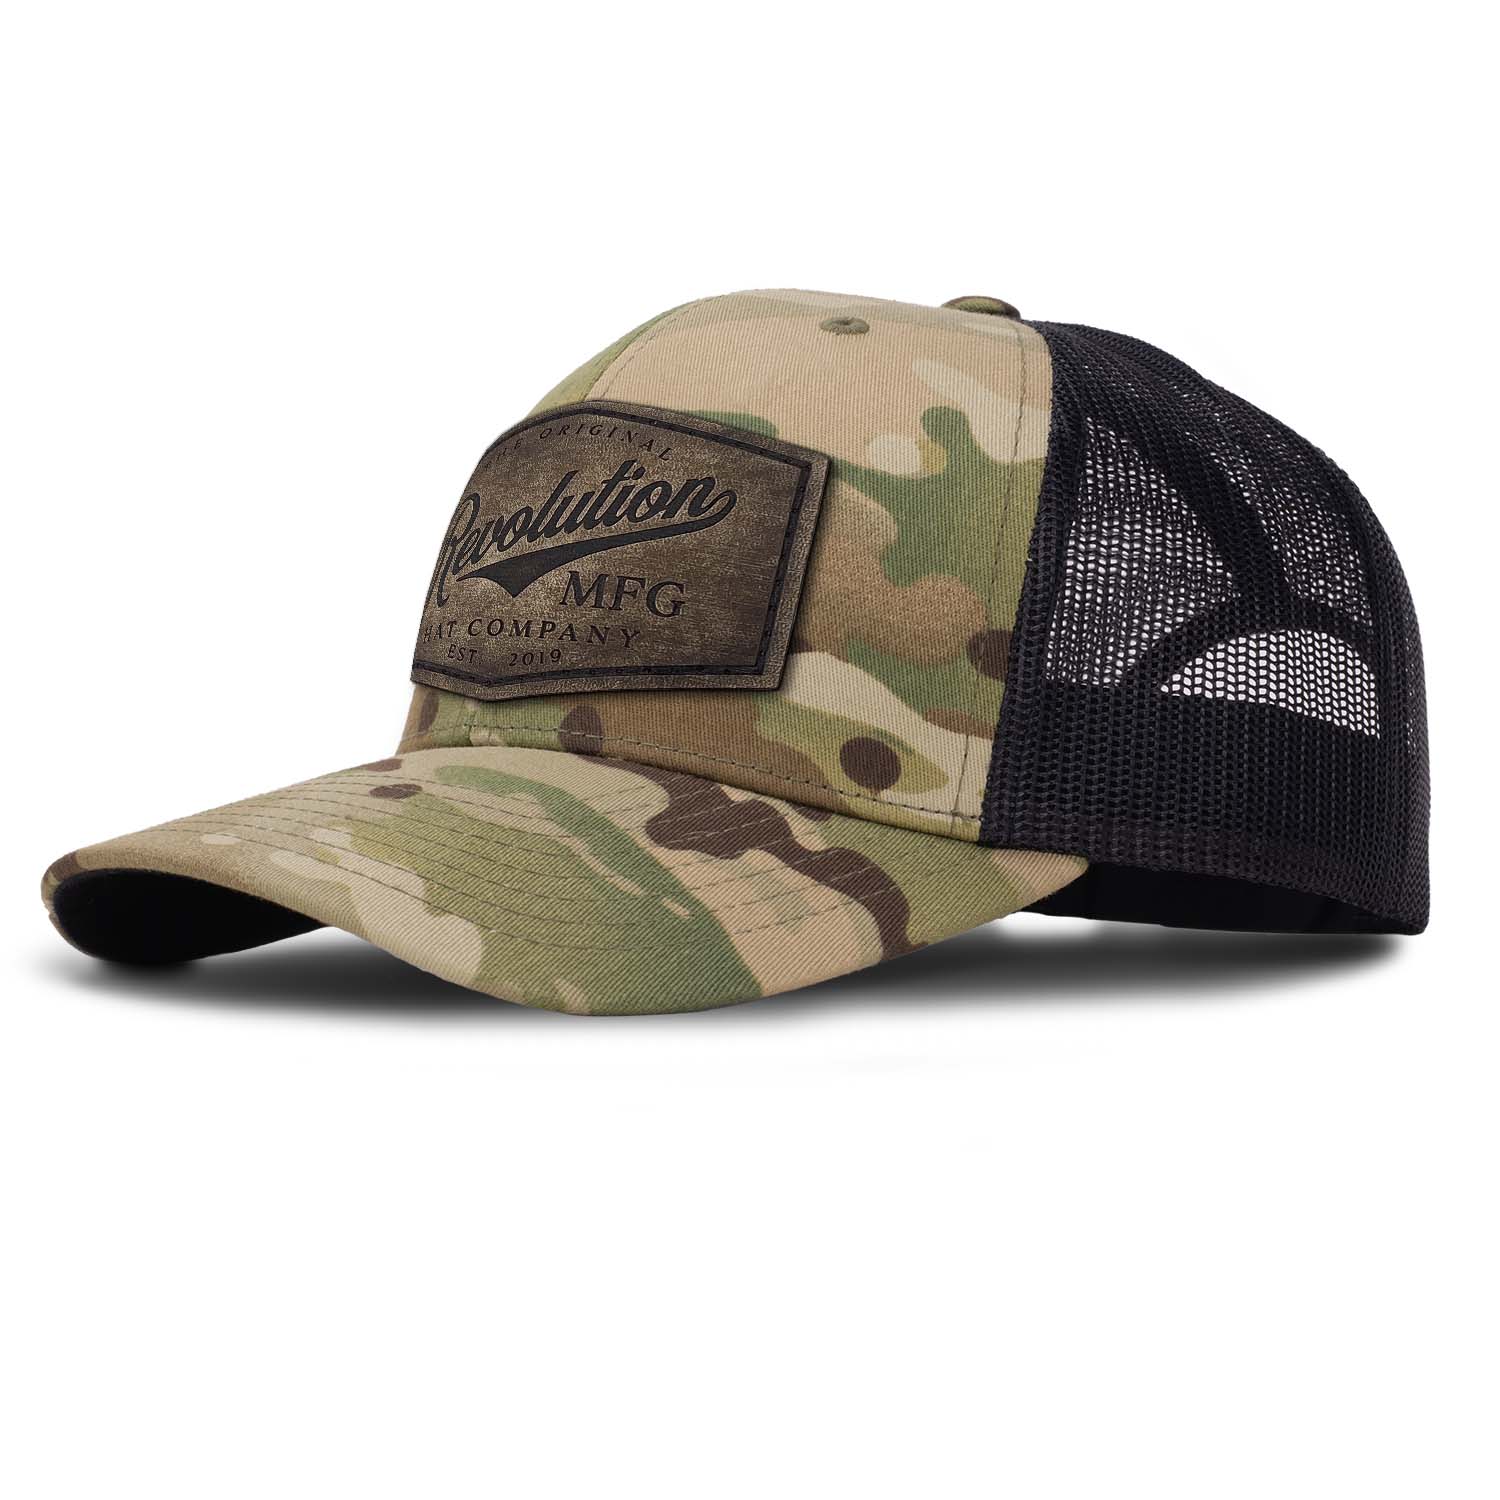 Revolution Hat Co full grain leather patch in a vintage finish on a multicam with black mesh classic trucker hat